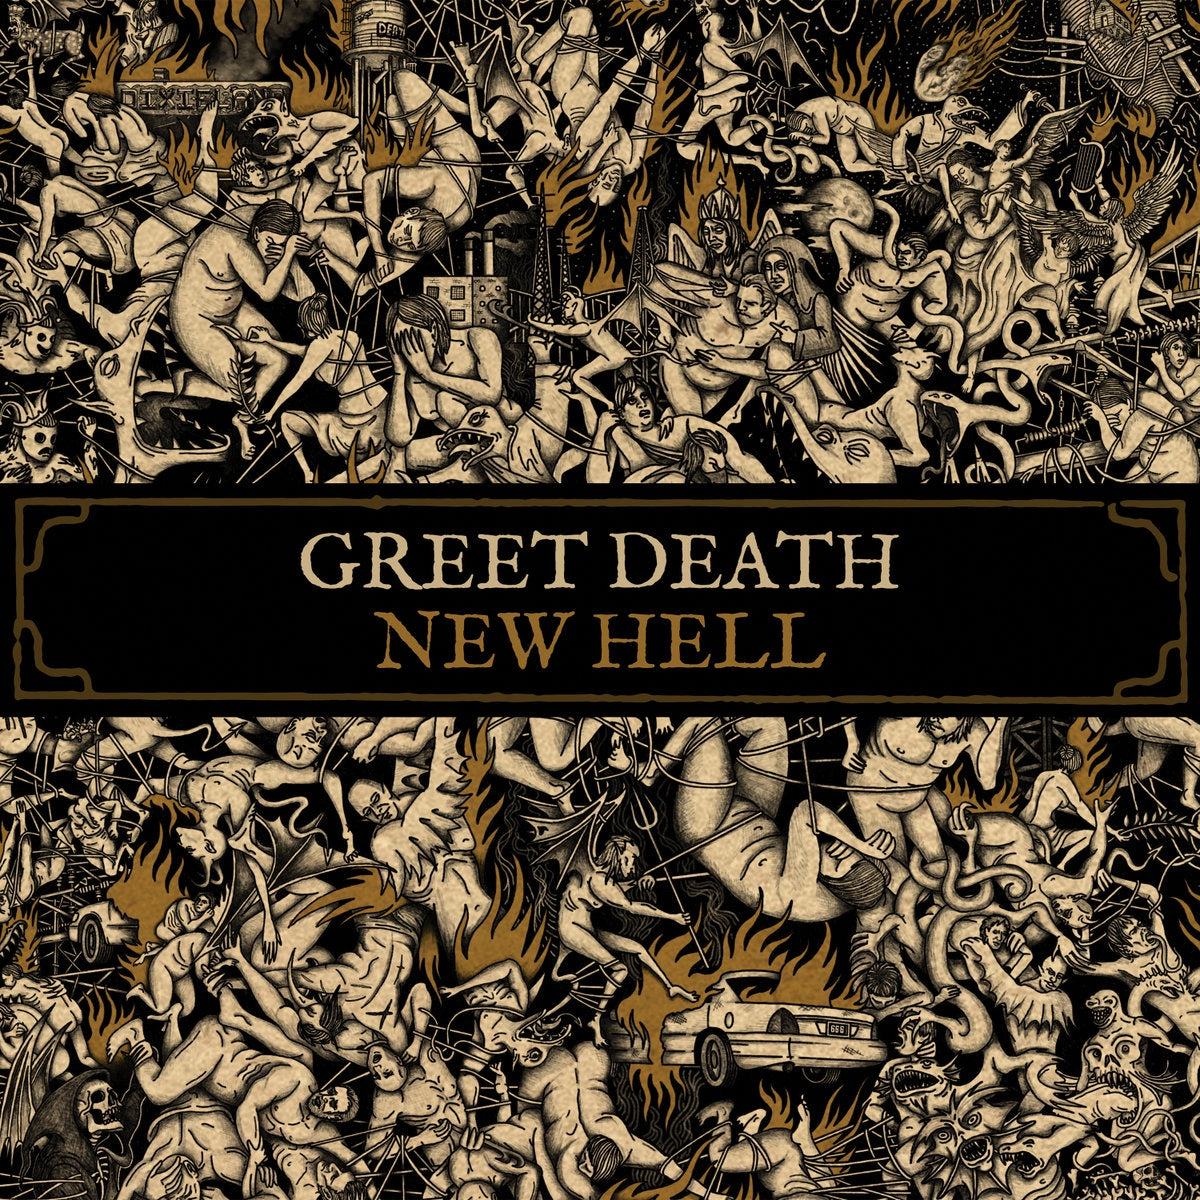 Greet Death - New Hell - New LP Record 2019 Deathwish Indie Exclusive Colored Vinyl - Post Rock